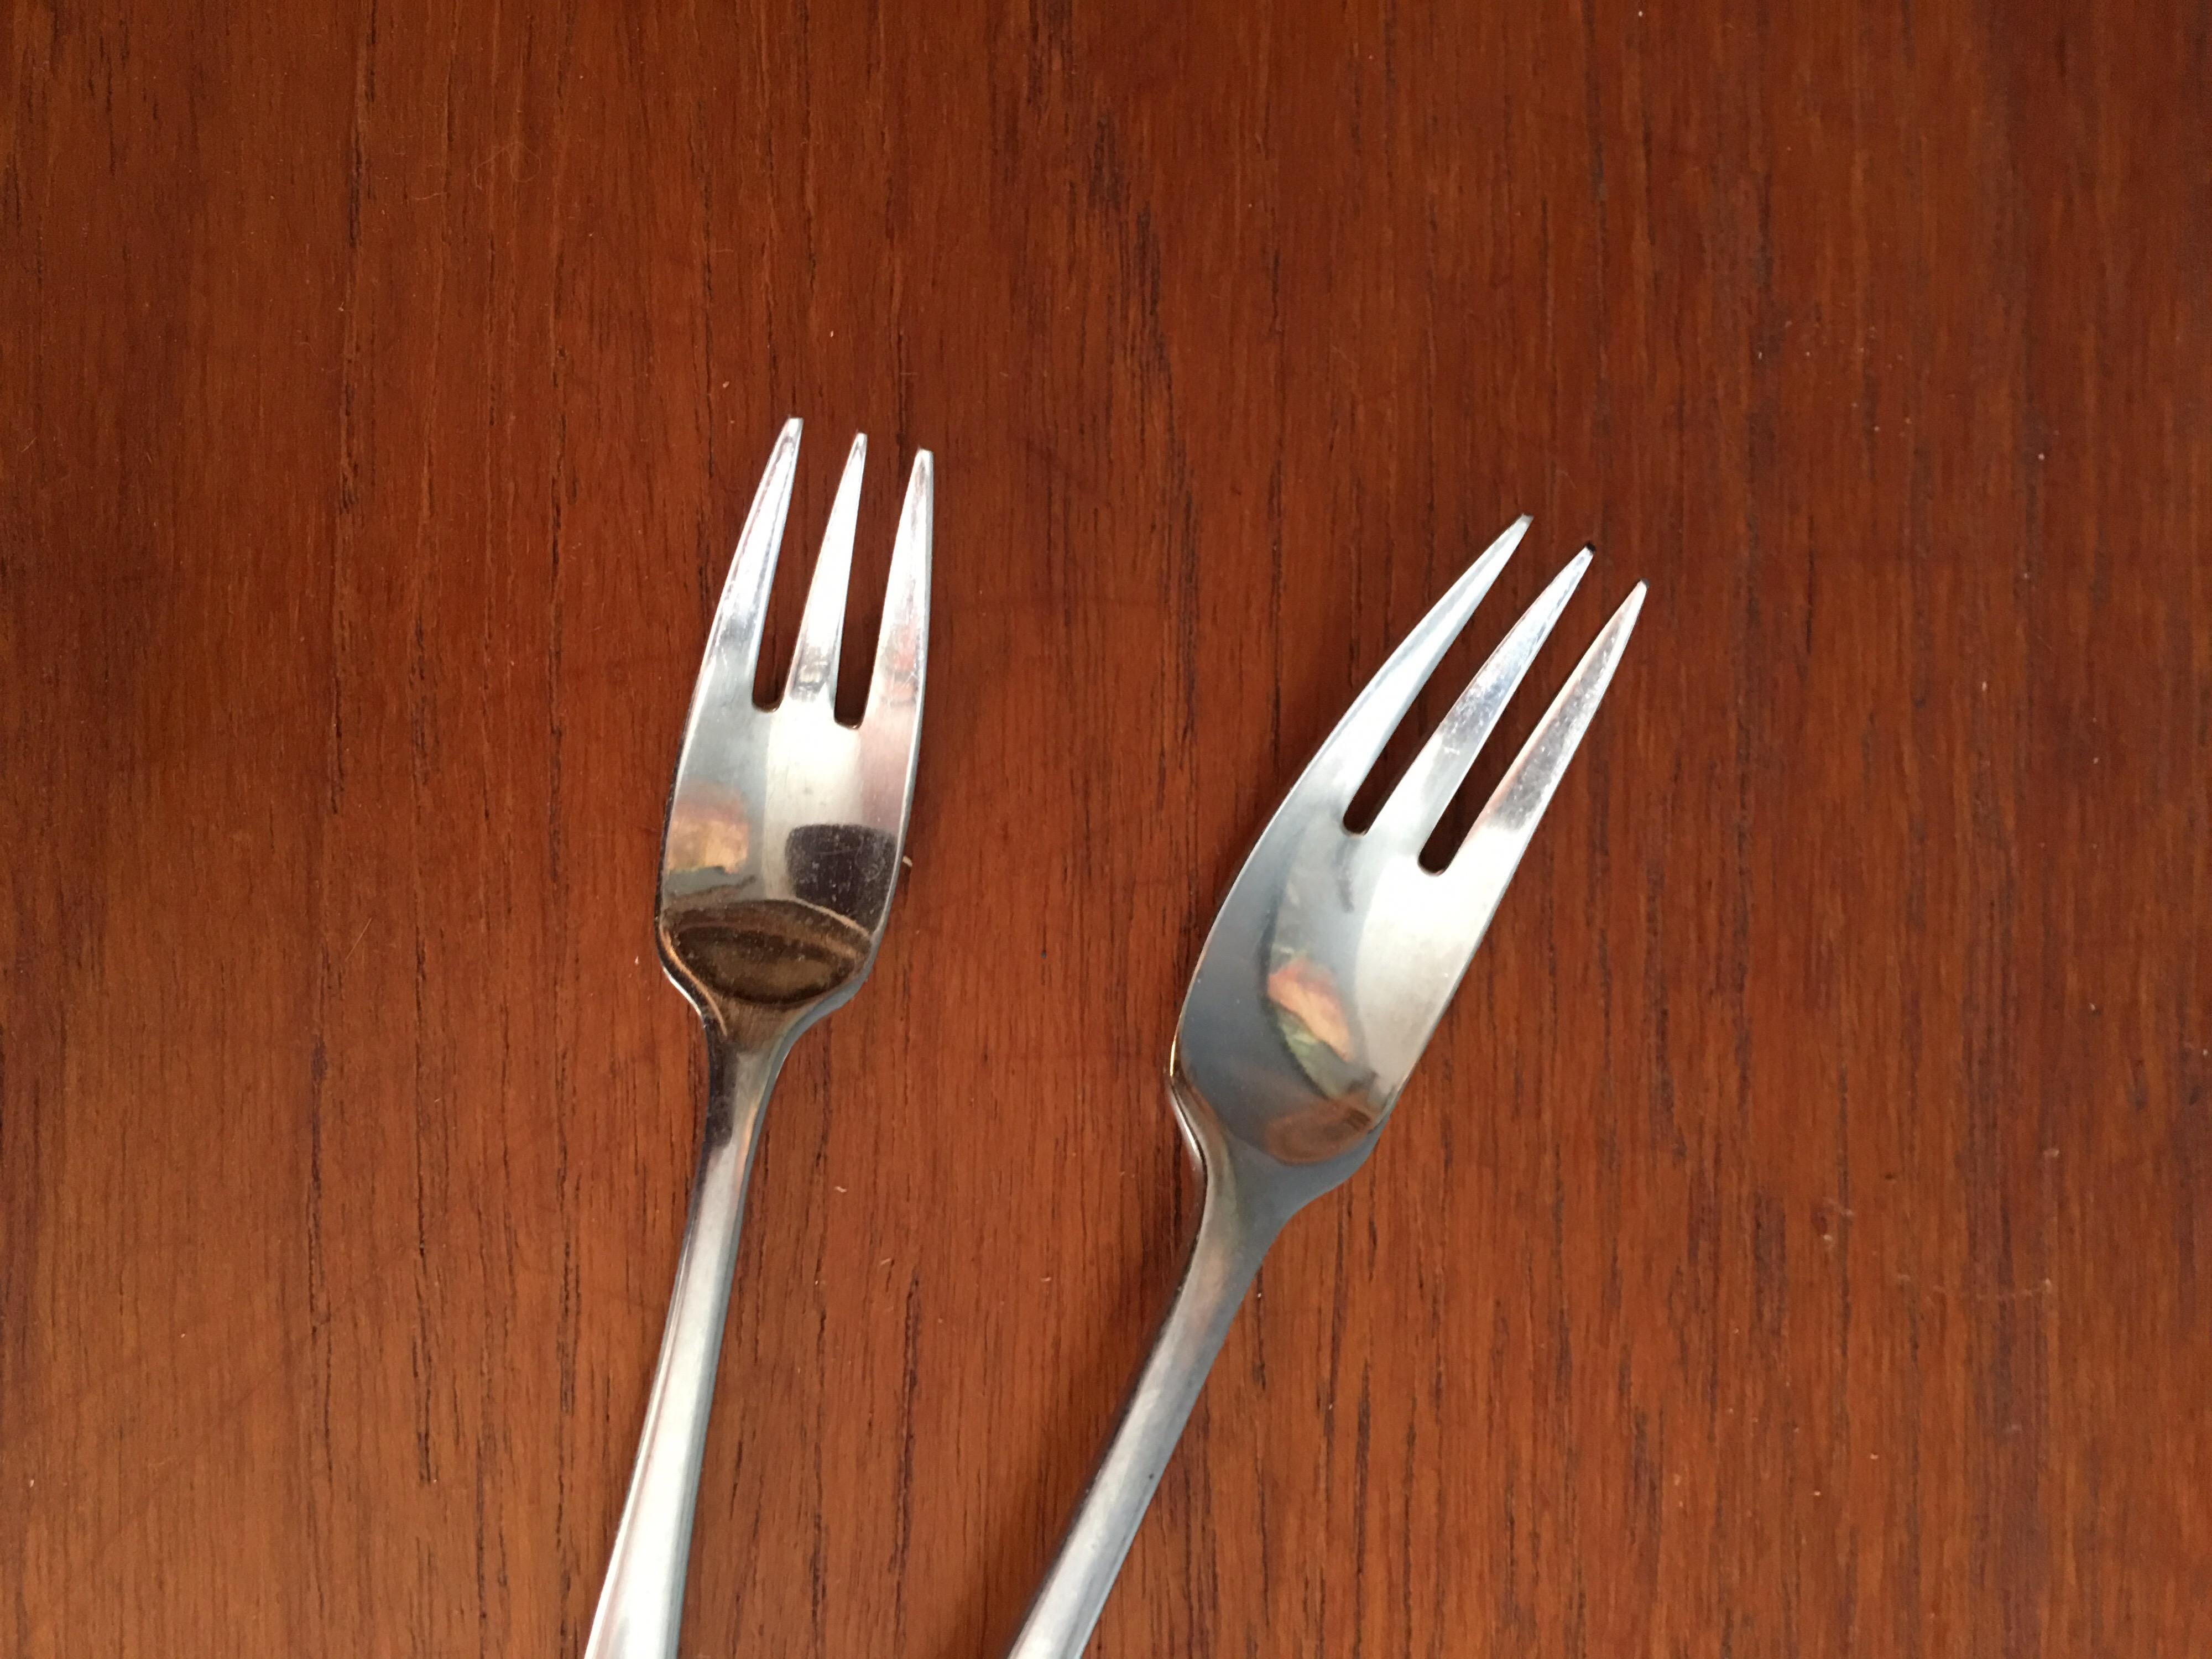 Nice large set of Dansk variation 5. Service for 10 with 12 teaspoons. Finished in a satin finish. Shows some wear, but no disposal damage or discoloration. Nice weight to pieces!